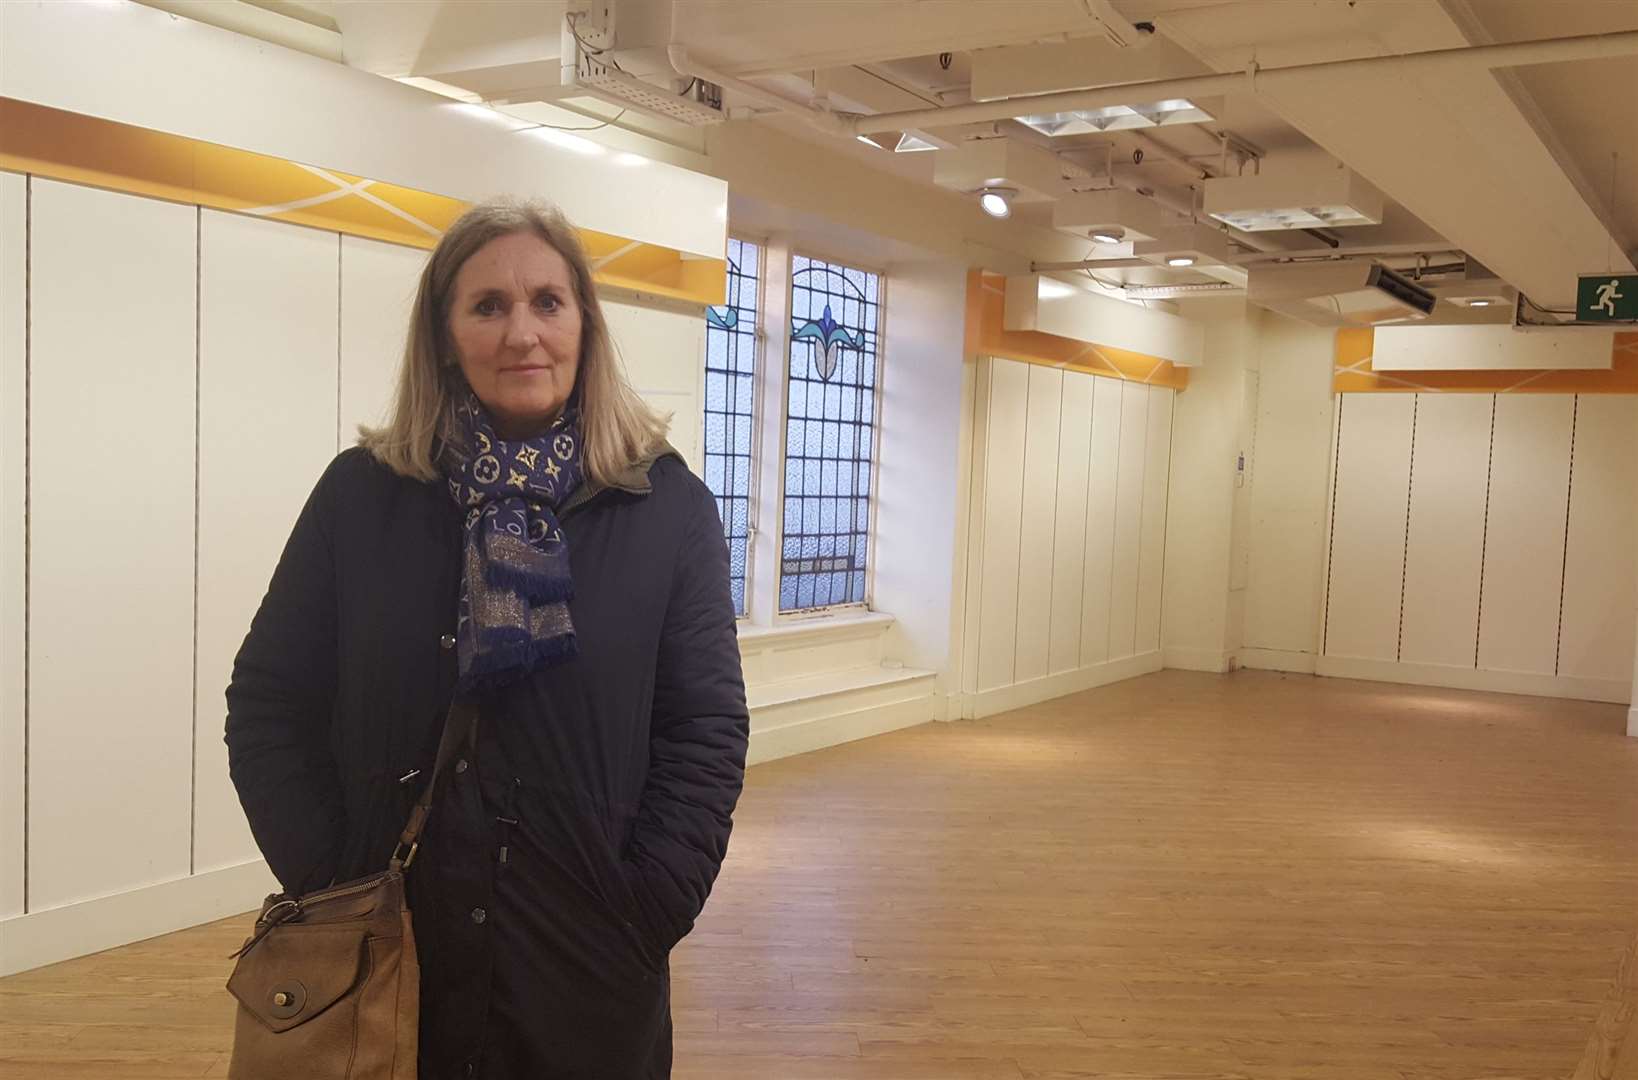 Former employee Sally Edgeway in the empty store on Sunday